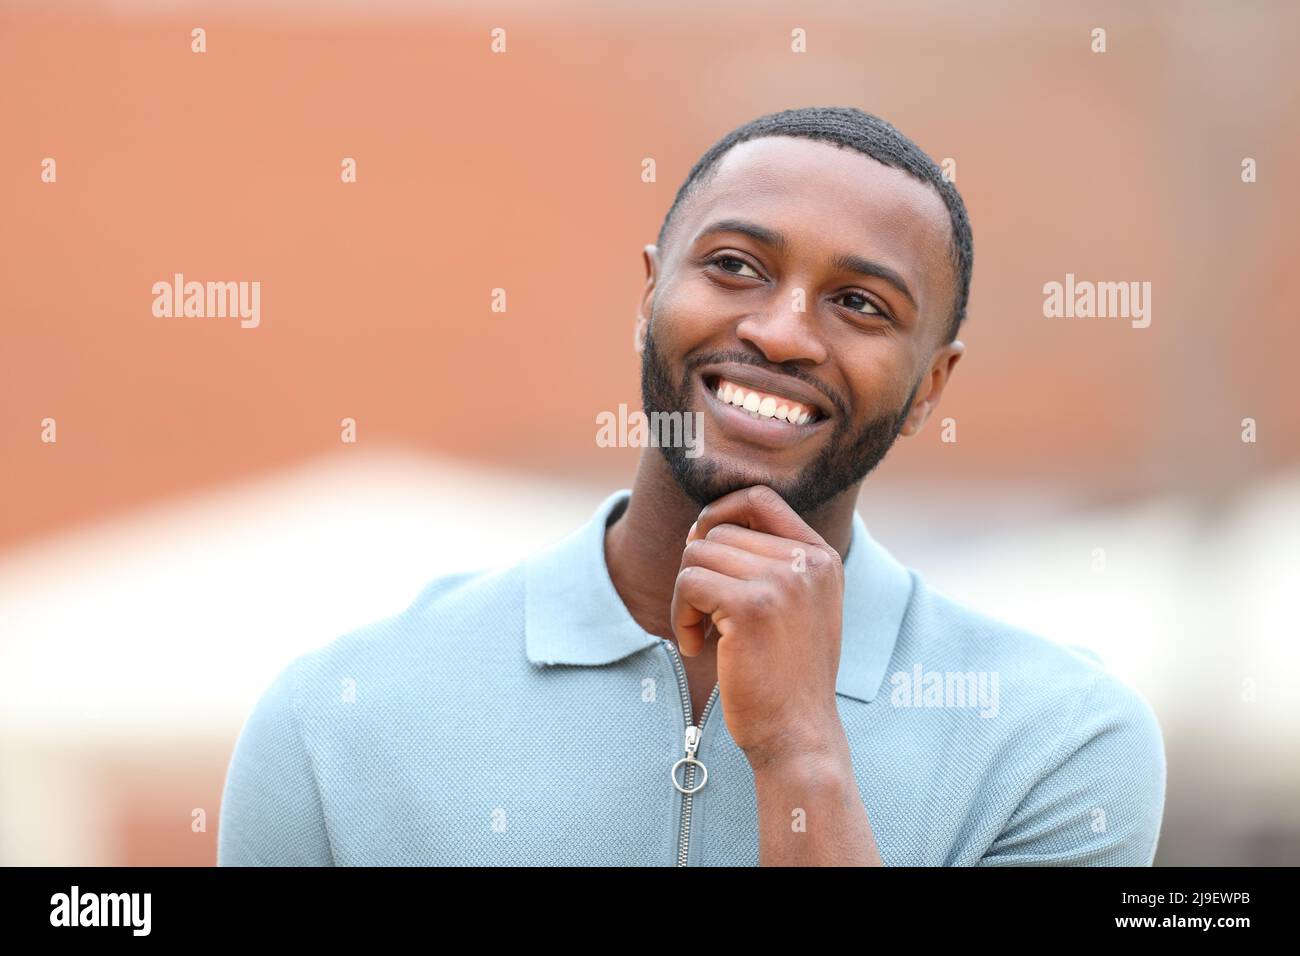 Front view portrait of a happy man with black skin thinking looking at side in the street Stock Photo